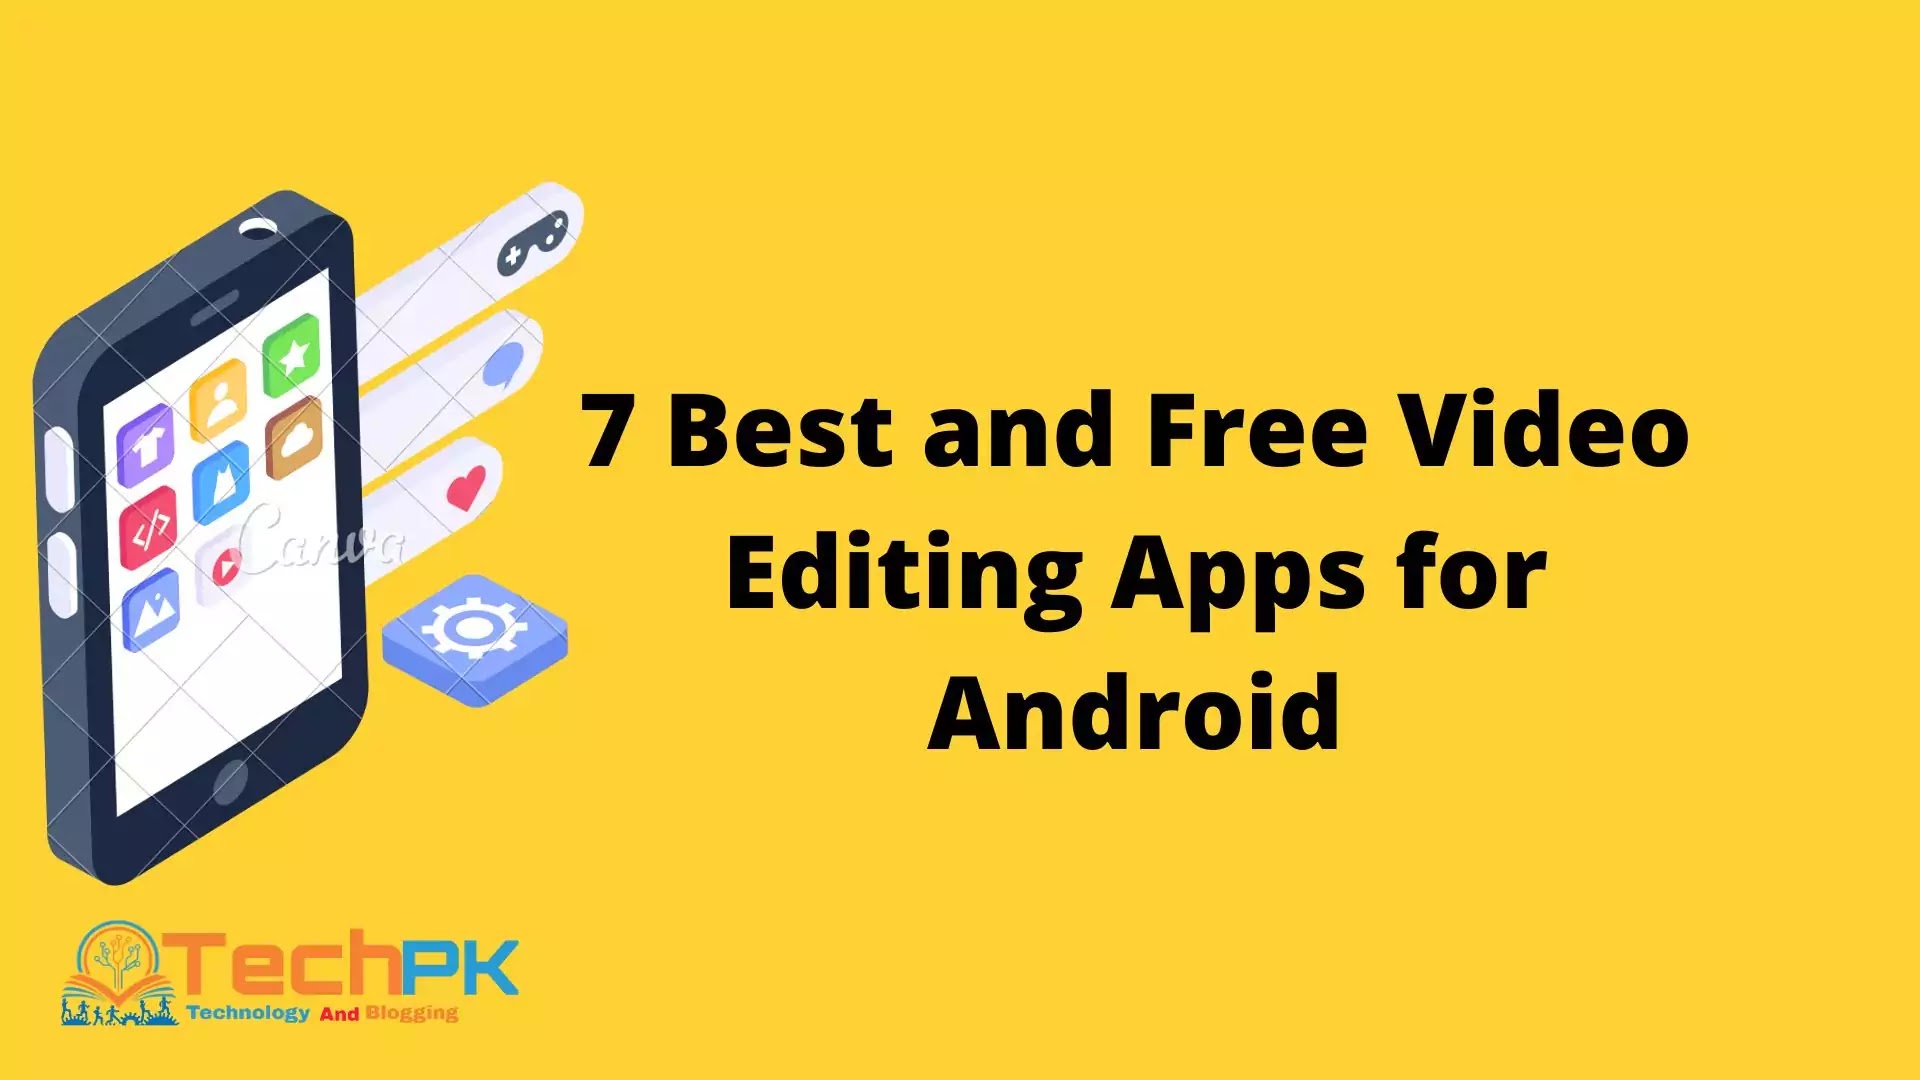 7 Best and Free Video Editing Apps for Android